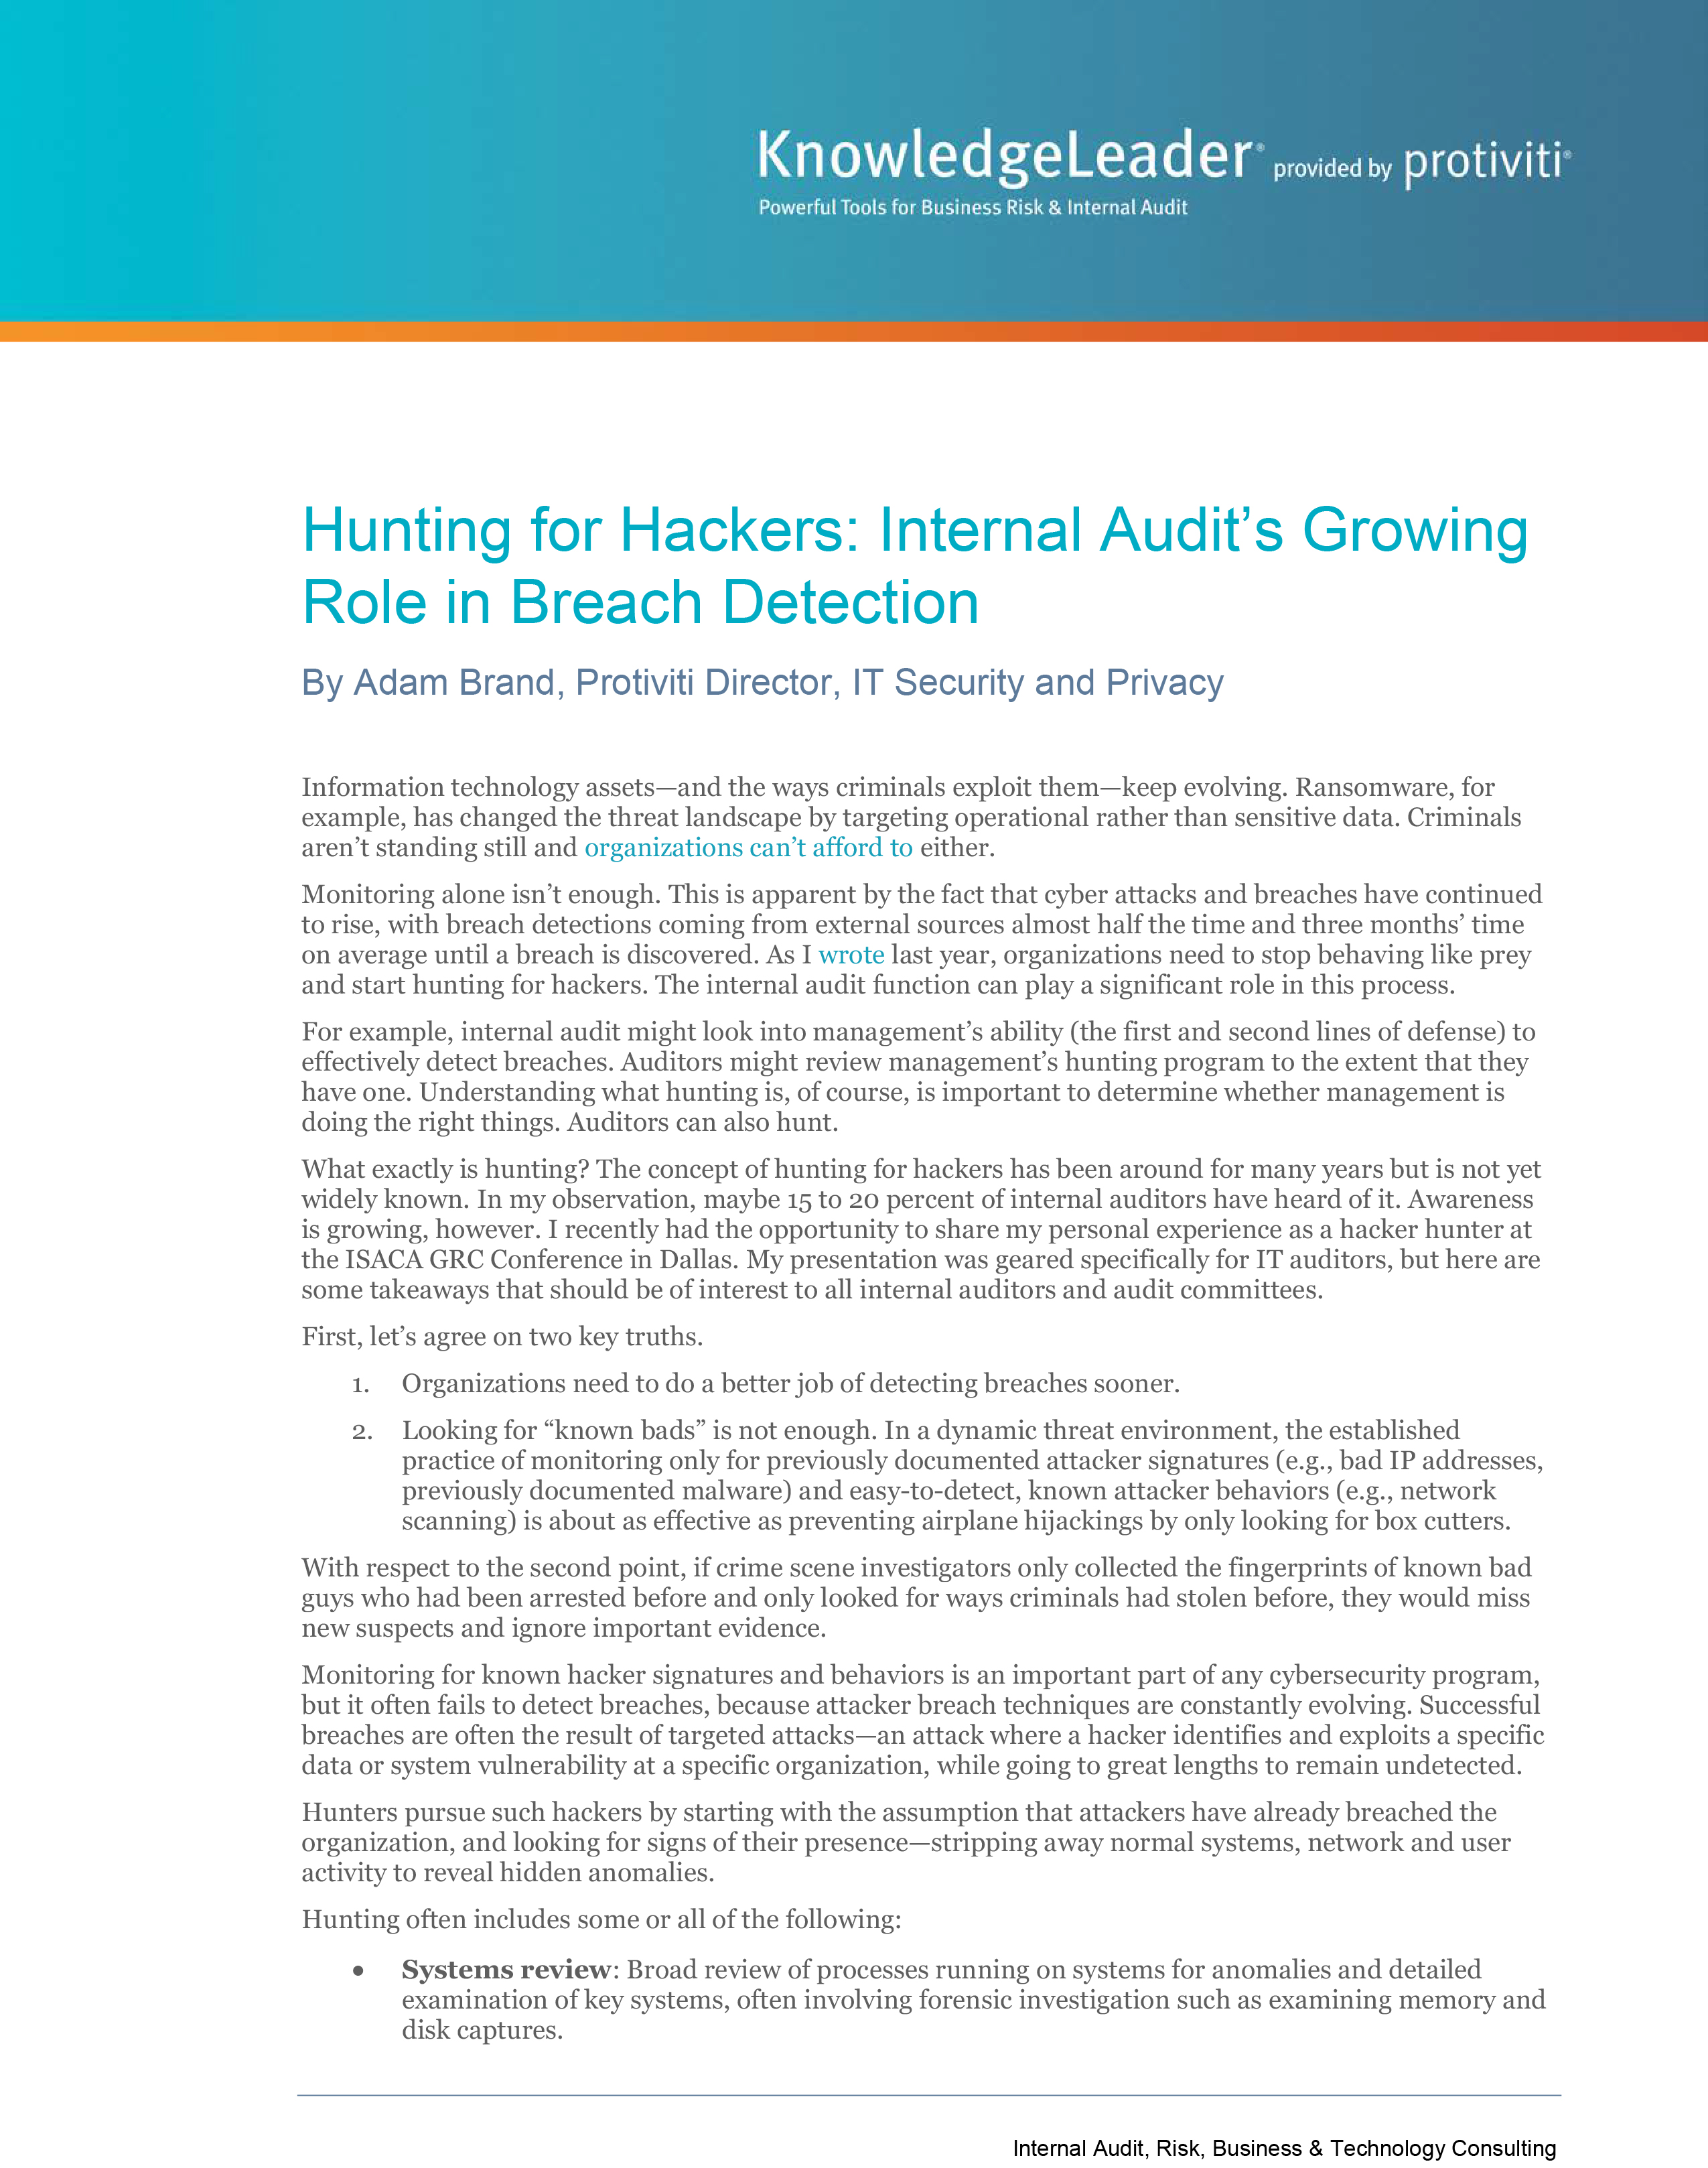 Screenshot of the first page of Hunting for Hackers - Internal Audit’s Growing Role in Breach Detection